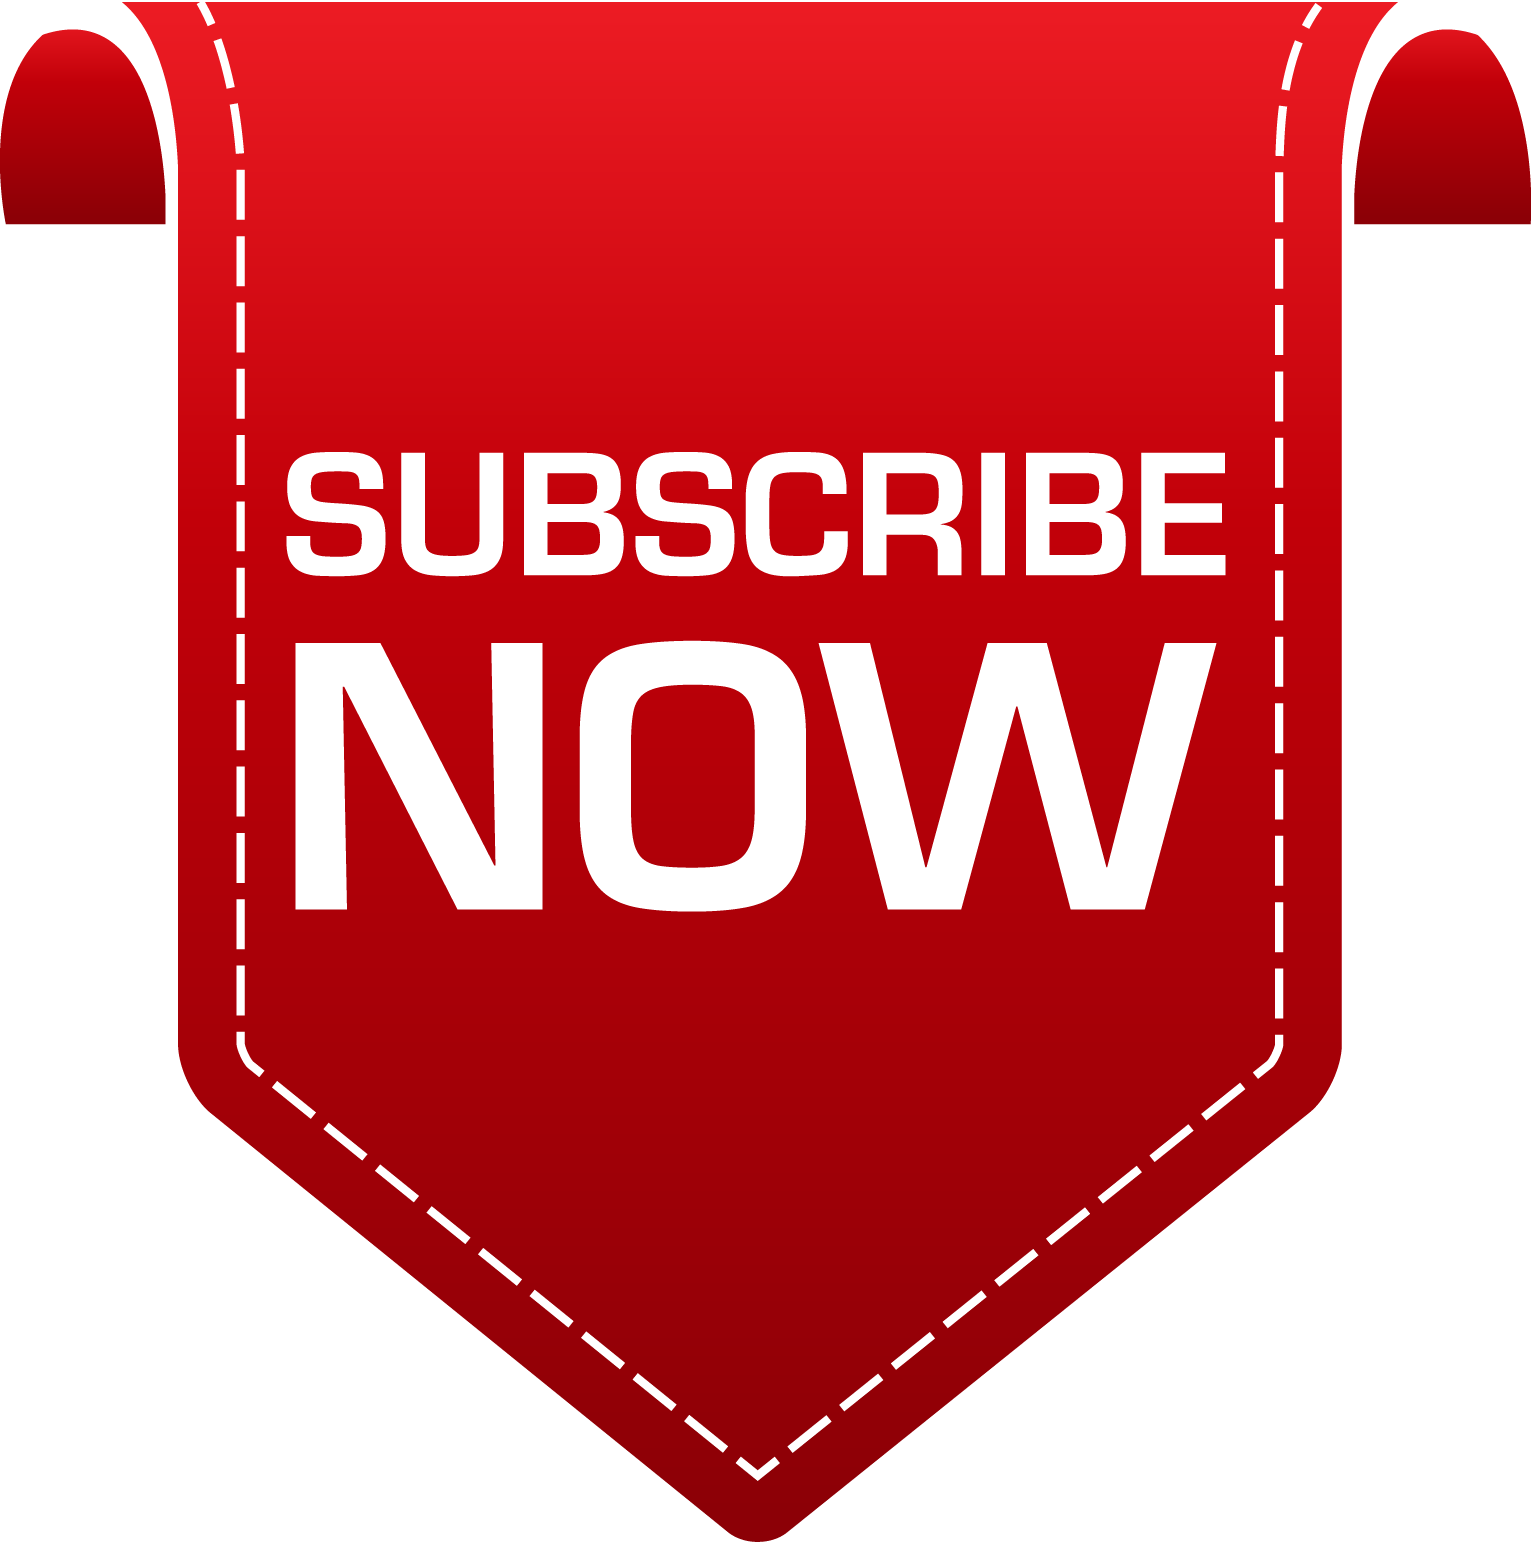 Subscribe Png 5 PNG Image